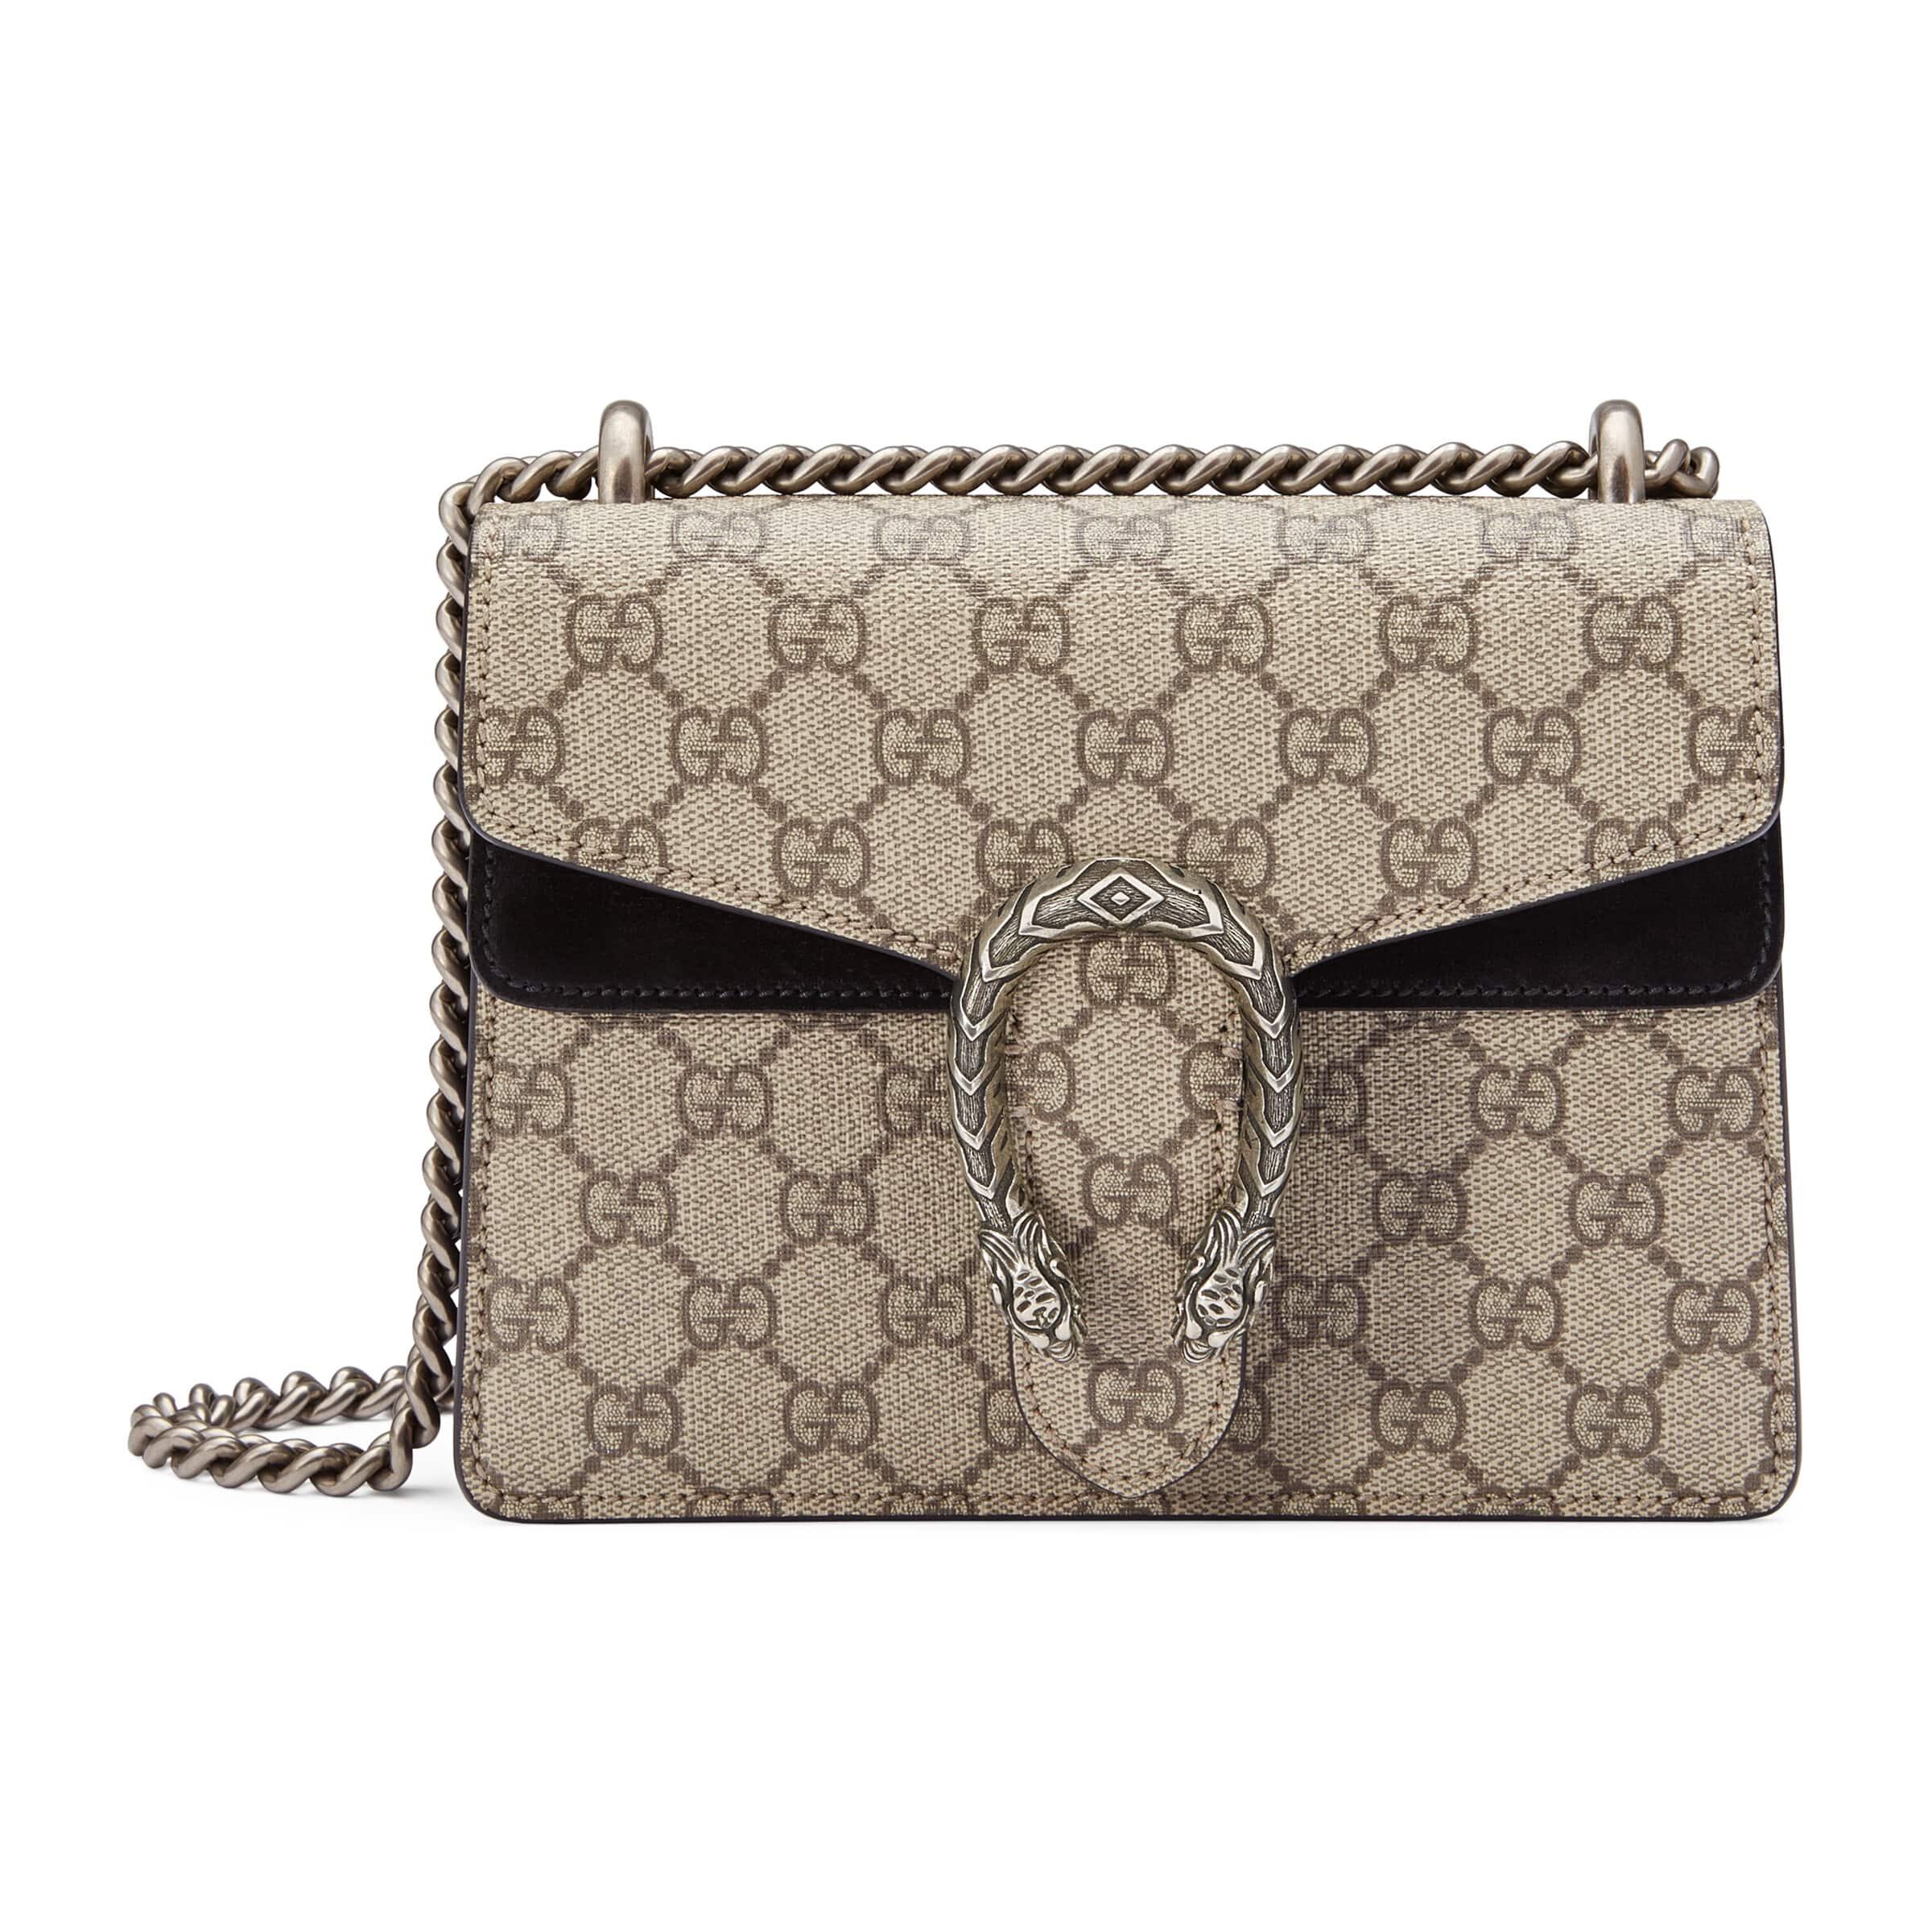 Gucci Canvas Dionysus Small GG Shoulder Bag in Beige (Natural 